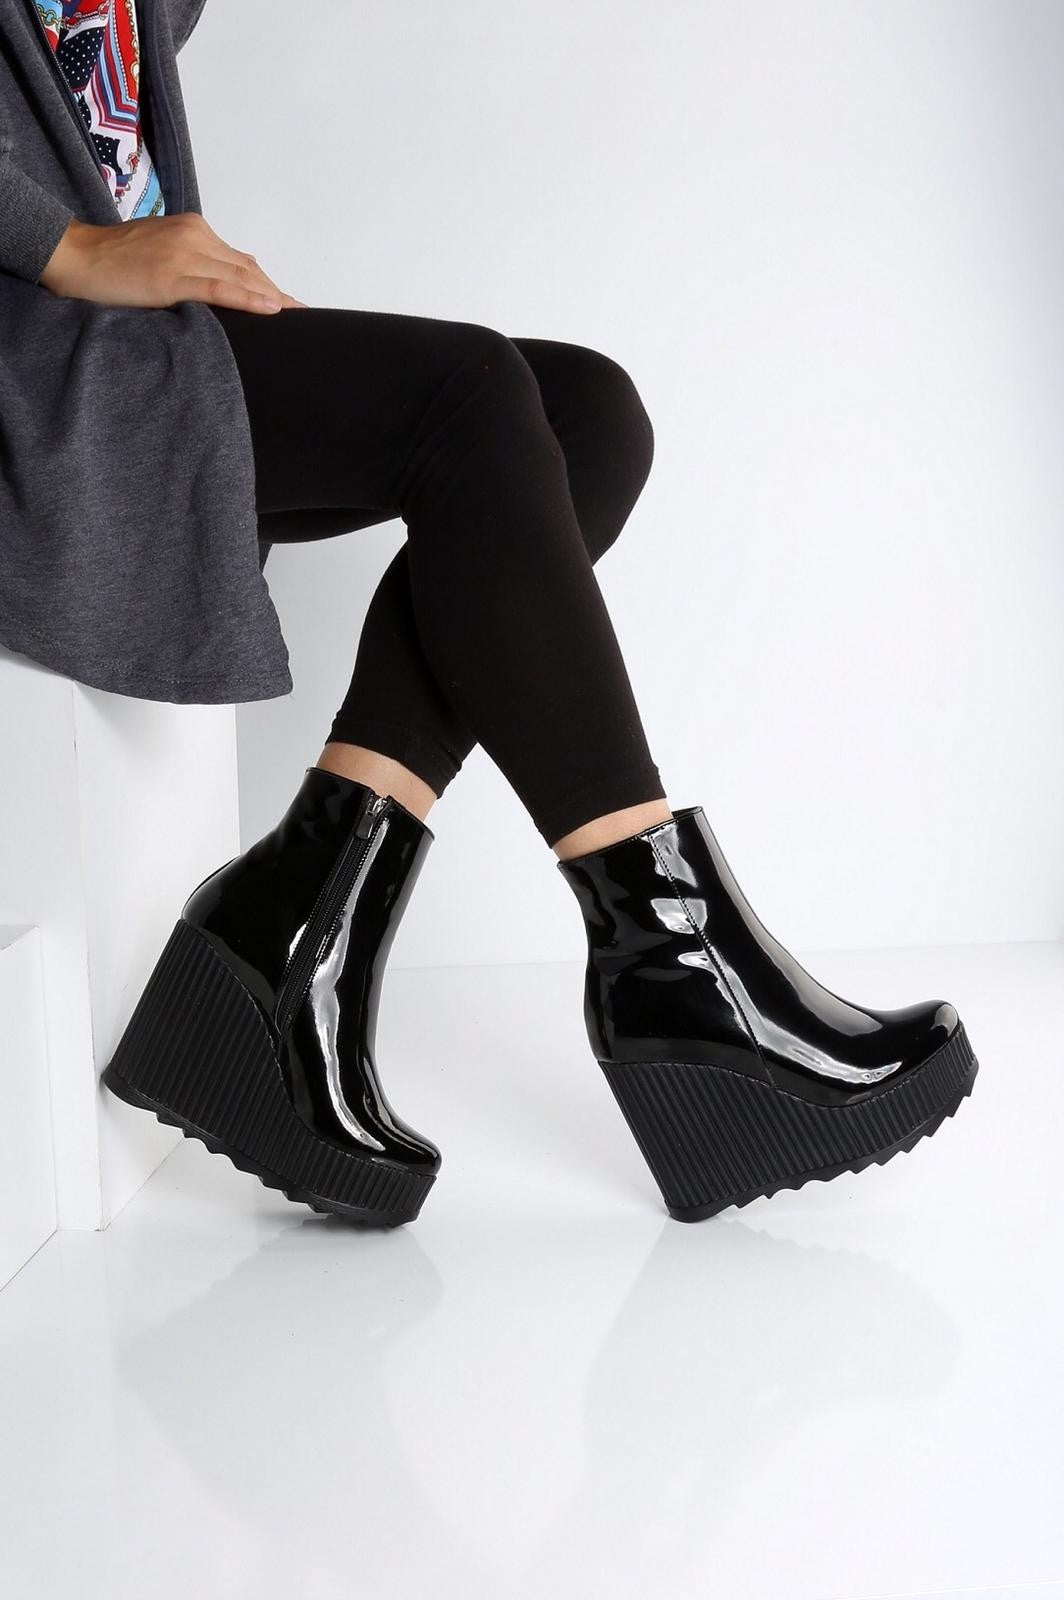 Women's Black Patent Leather Wedge Heel Boots - STREETMODE™